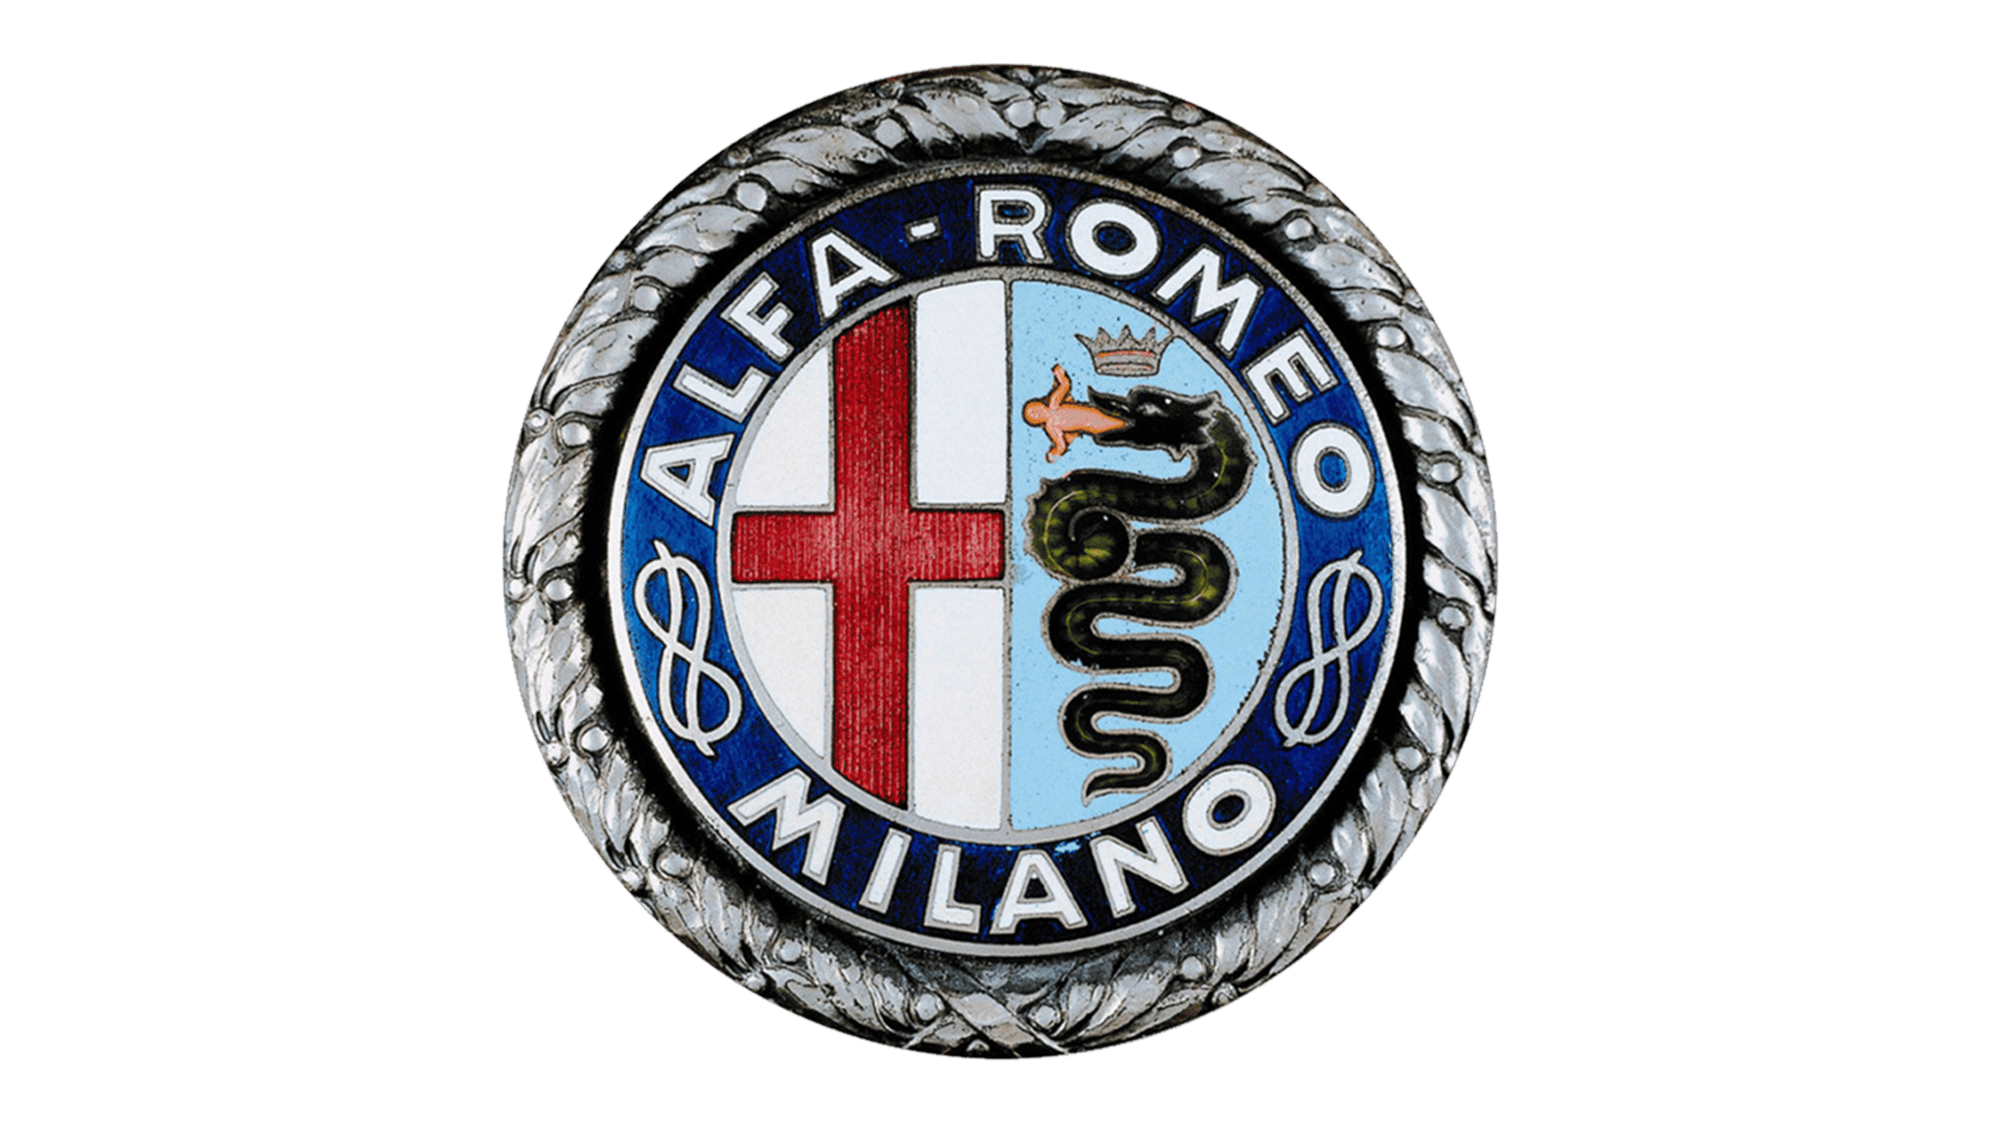 Alfa Romeo Logo and symbol, meaning, history, PNG, brand